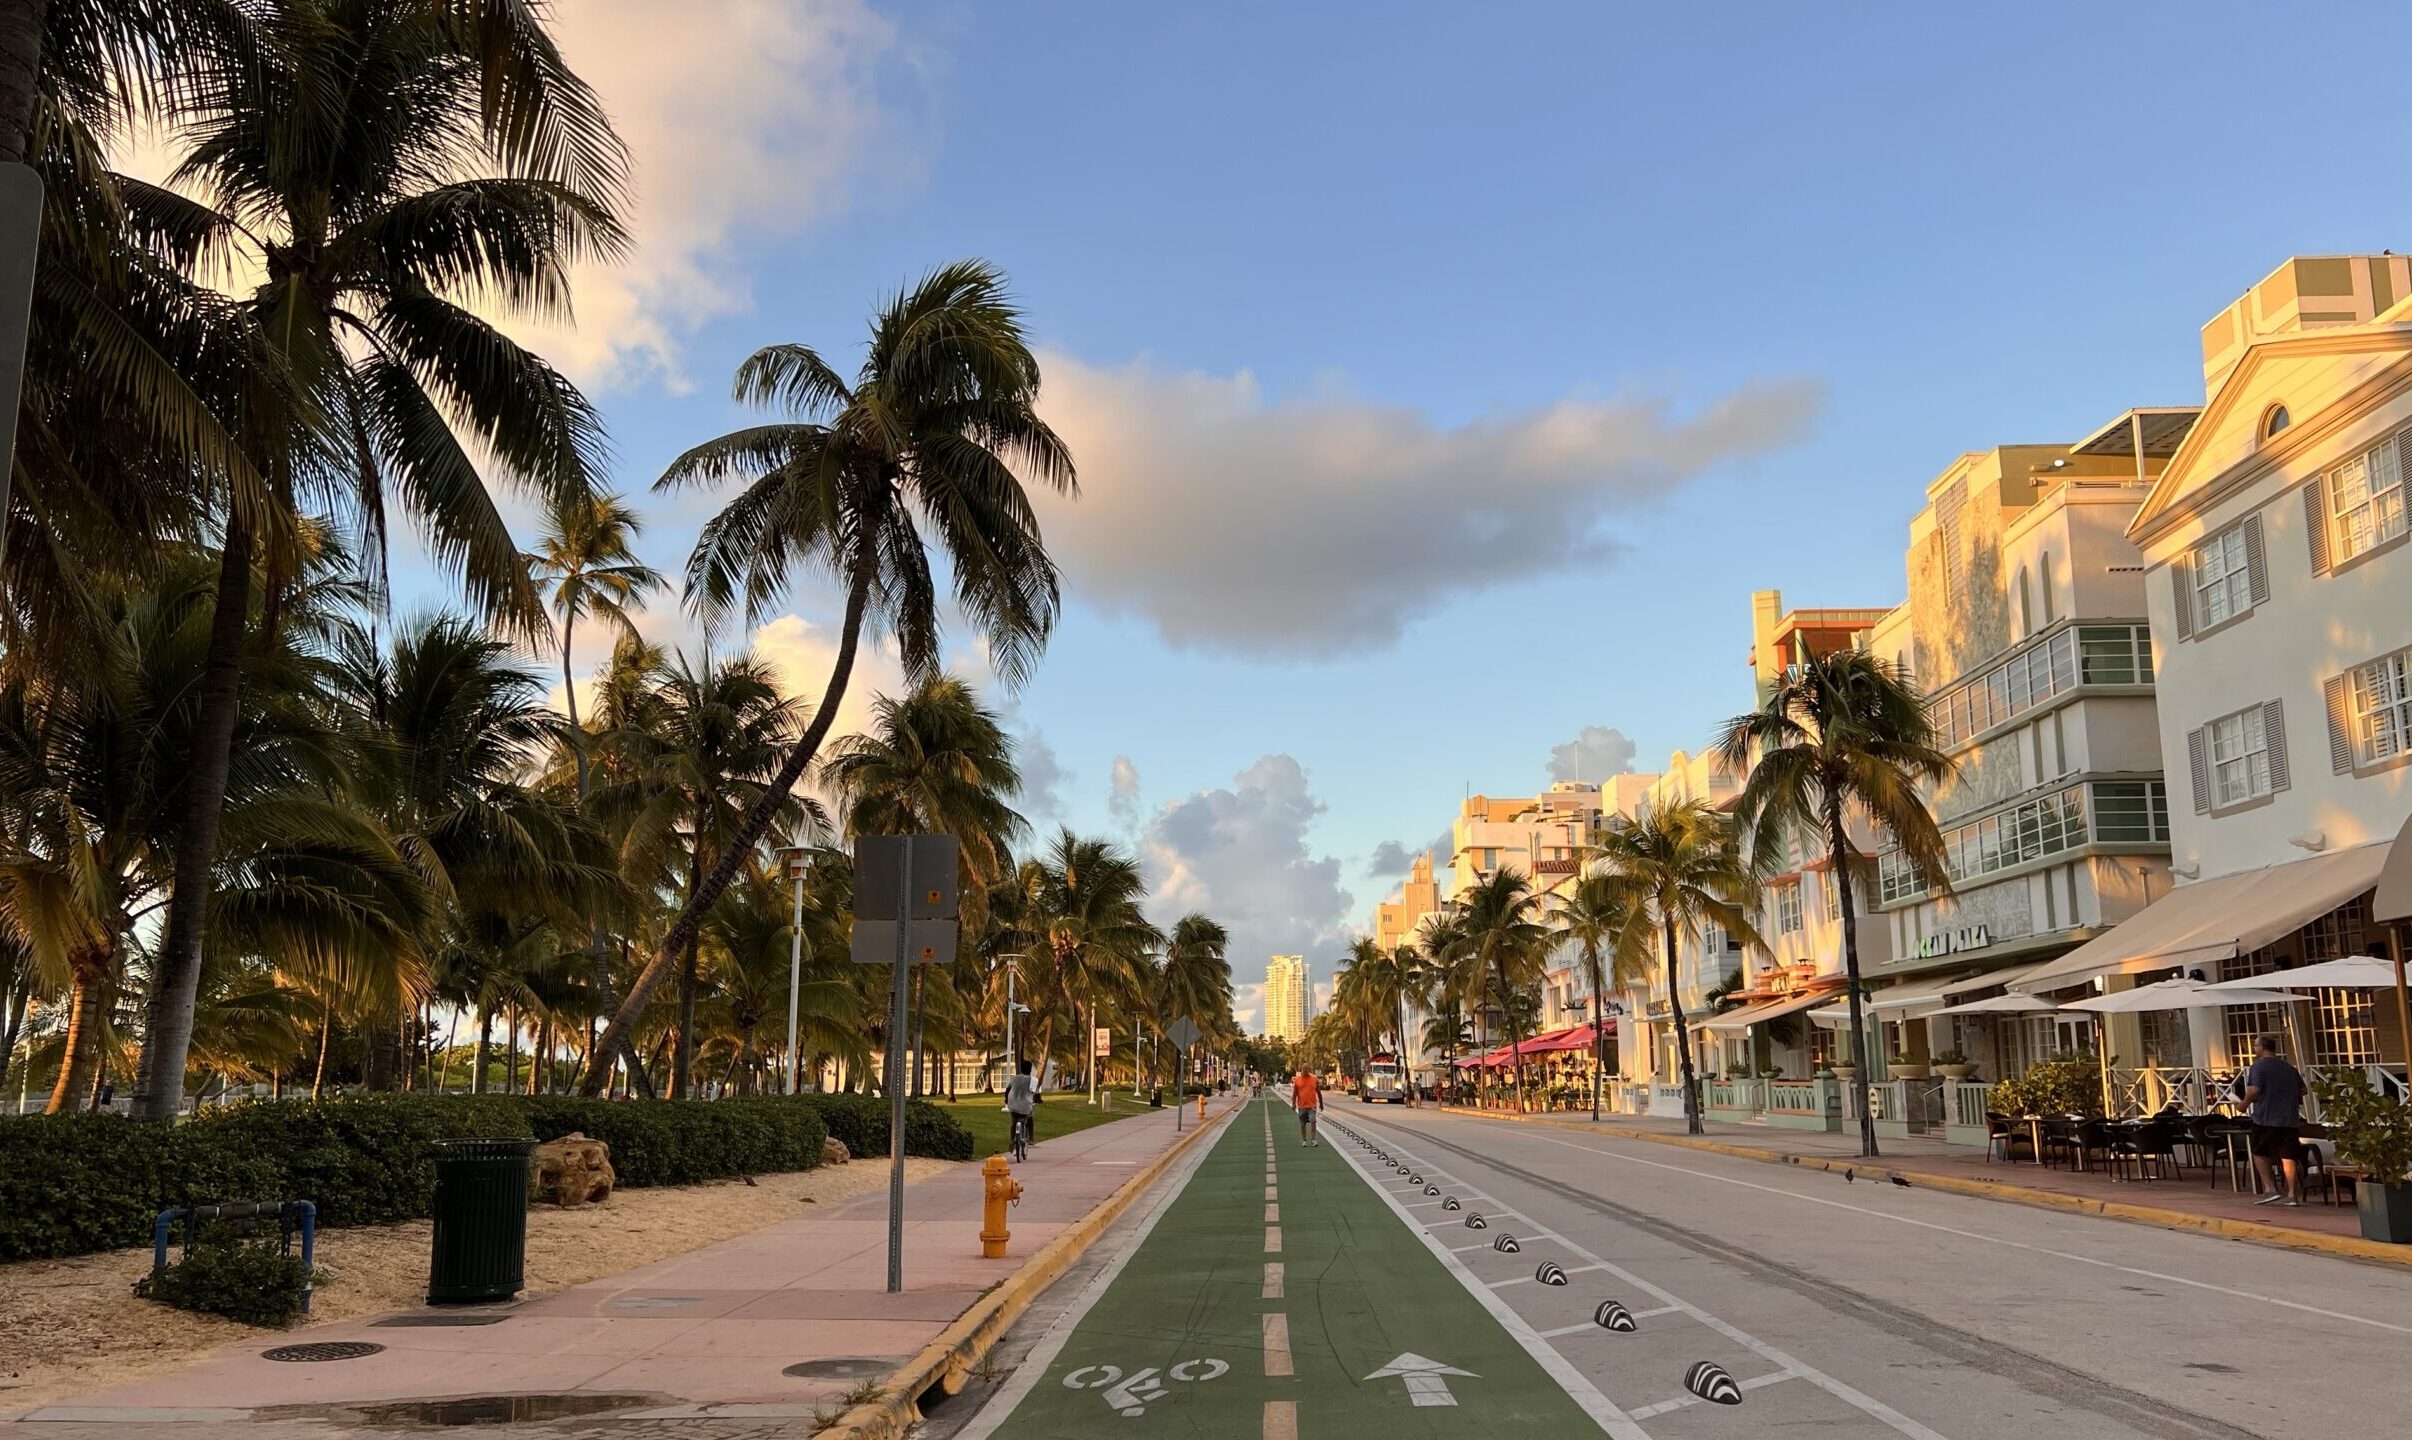 Jesus!! Direct flight from Toronto (Waterloo) to amazing Miami (Hollywood) for only 115 CAD round-trip